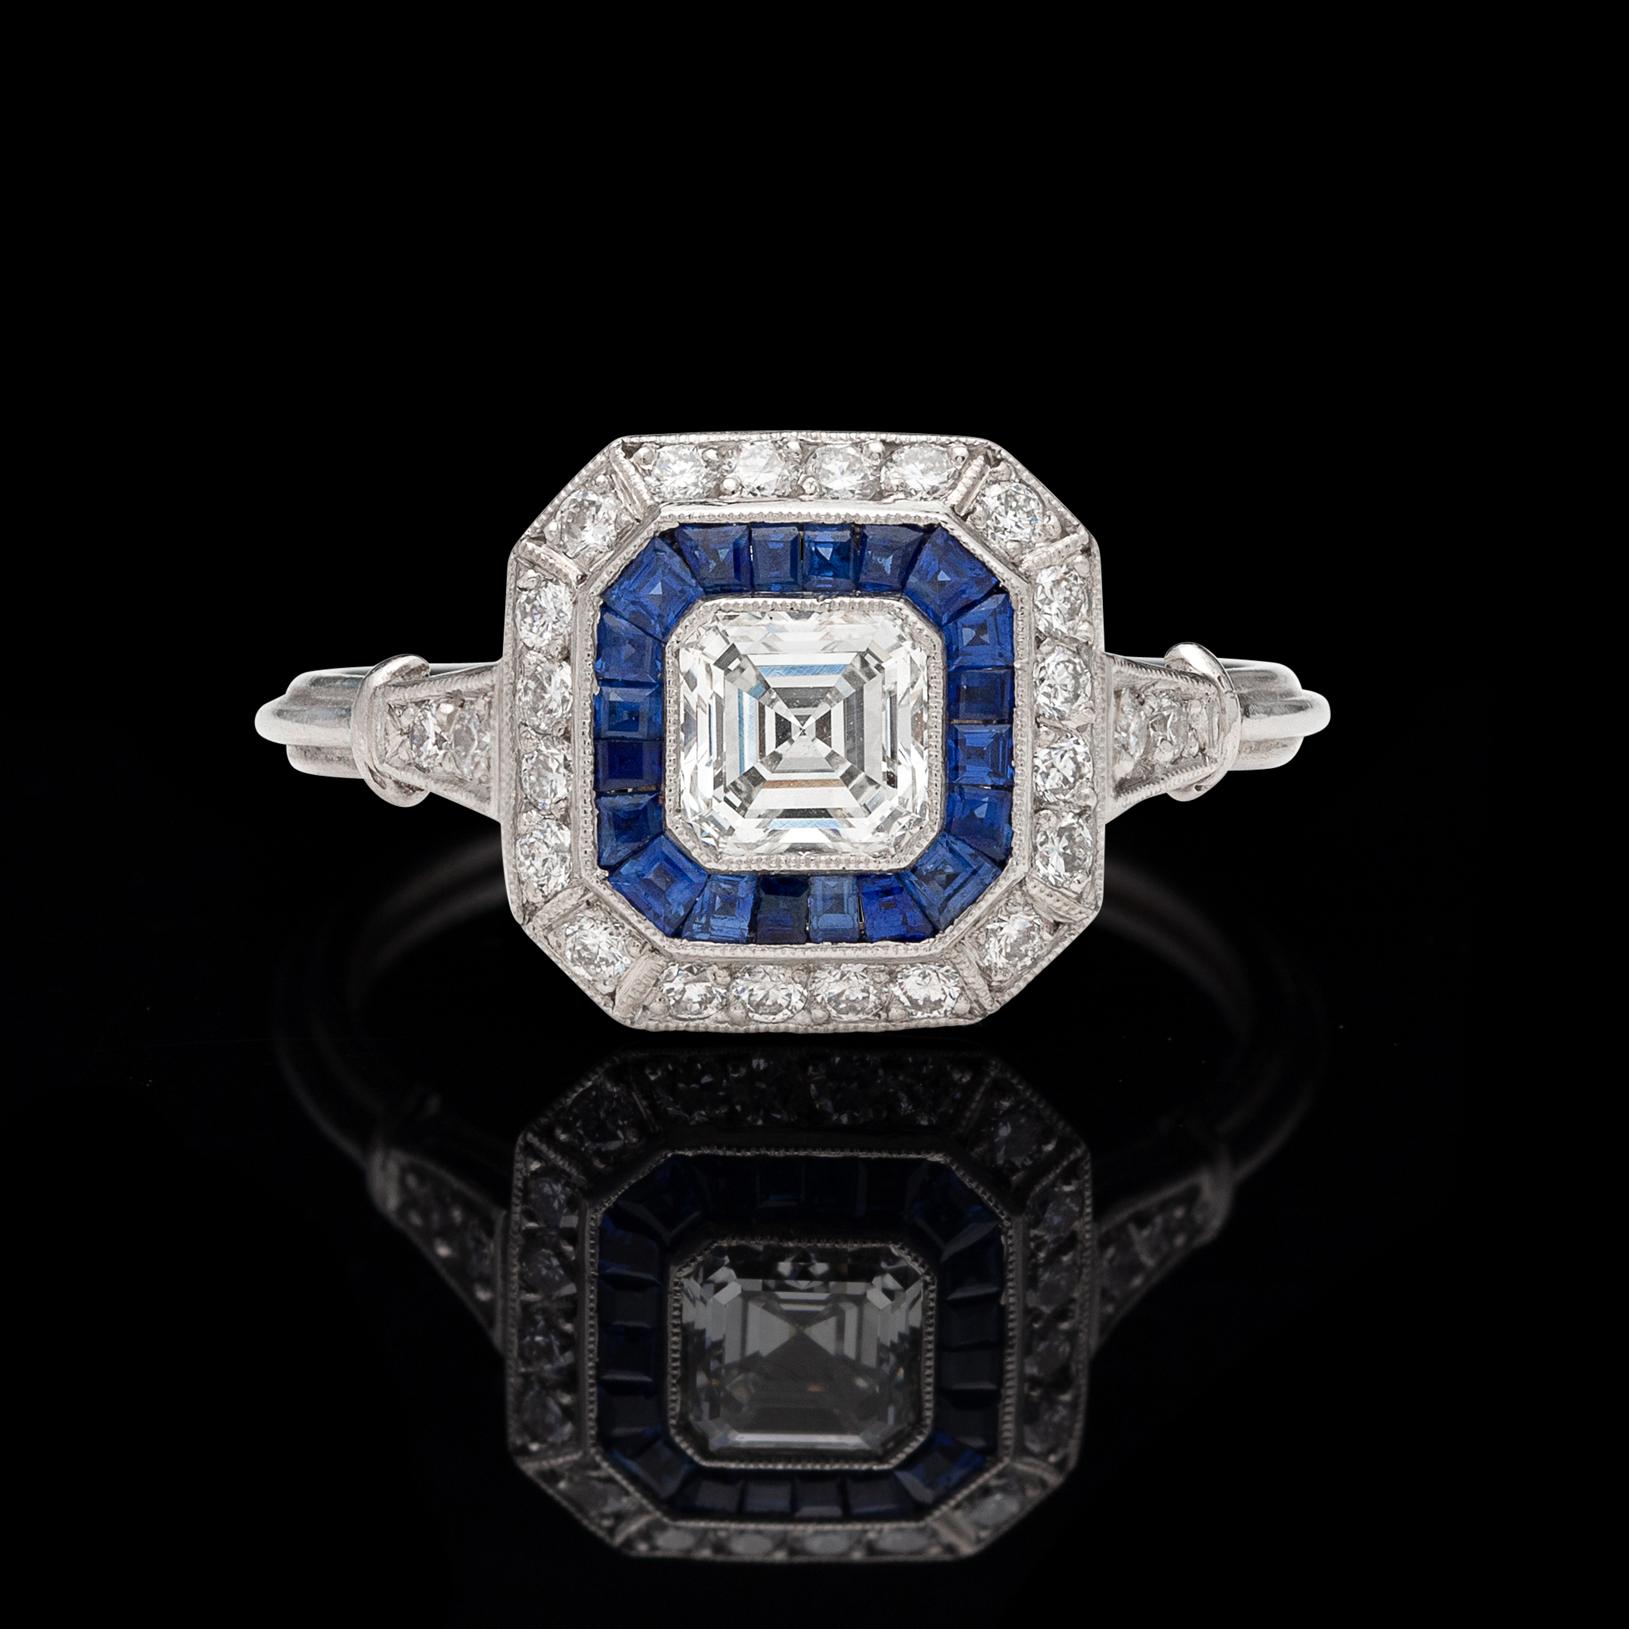 An Art Deco inspired 18k white gold ring for the ages! It centers around a gorgeous bezel-set Asscher-cut diamond, weighing an estimated 0.55 carat, G/VS, set within a frame of calibre-cut sapphires, and then a second frame of 24 round brilliant-cut